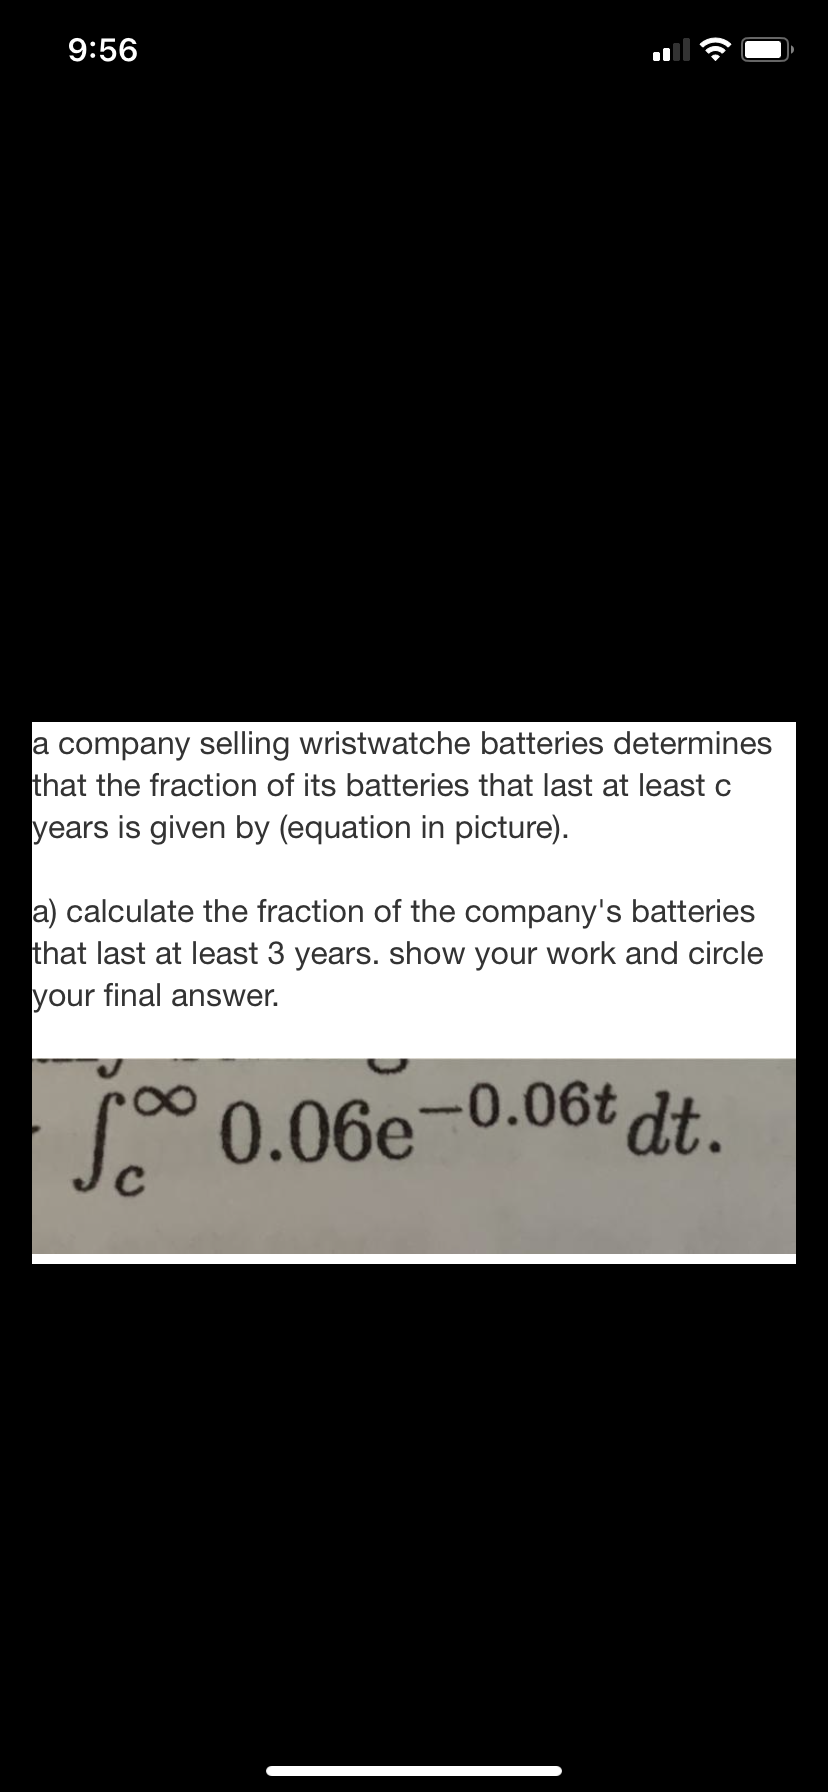 9:56
a company selling wristwatche batteries determines
that the fraction of its batteries that last at least c
years is given by (equation in picture).
a) calculate the fraction of the company's batteries
that last at least 3 years. show your work and circle
your final answer.
0.06e-0.06t dt.
